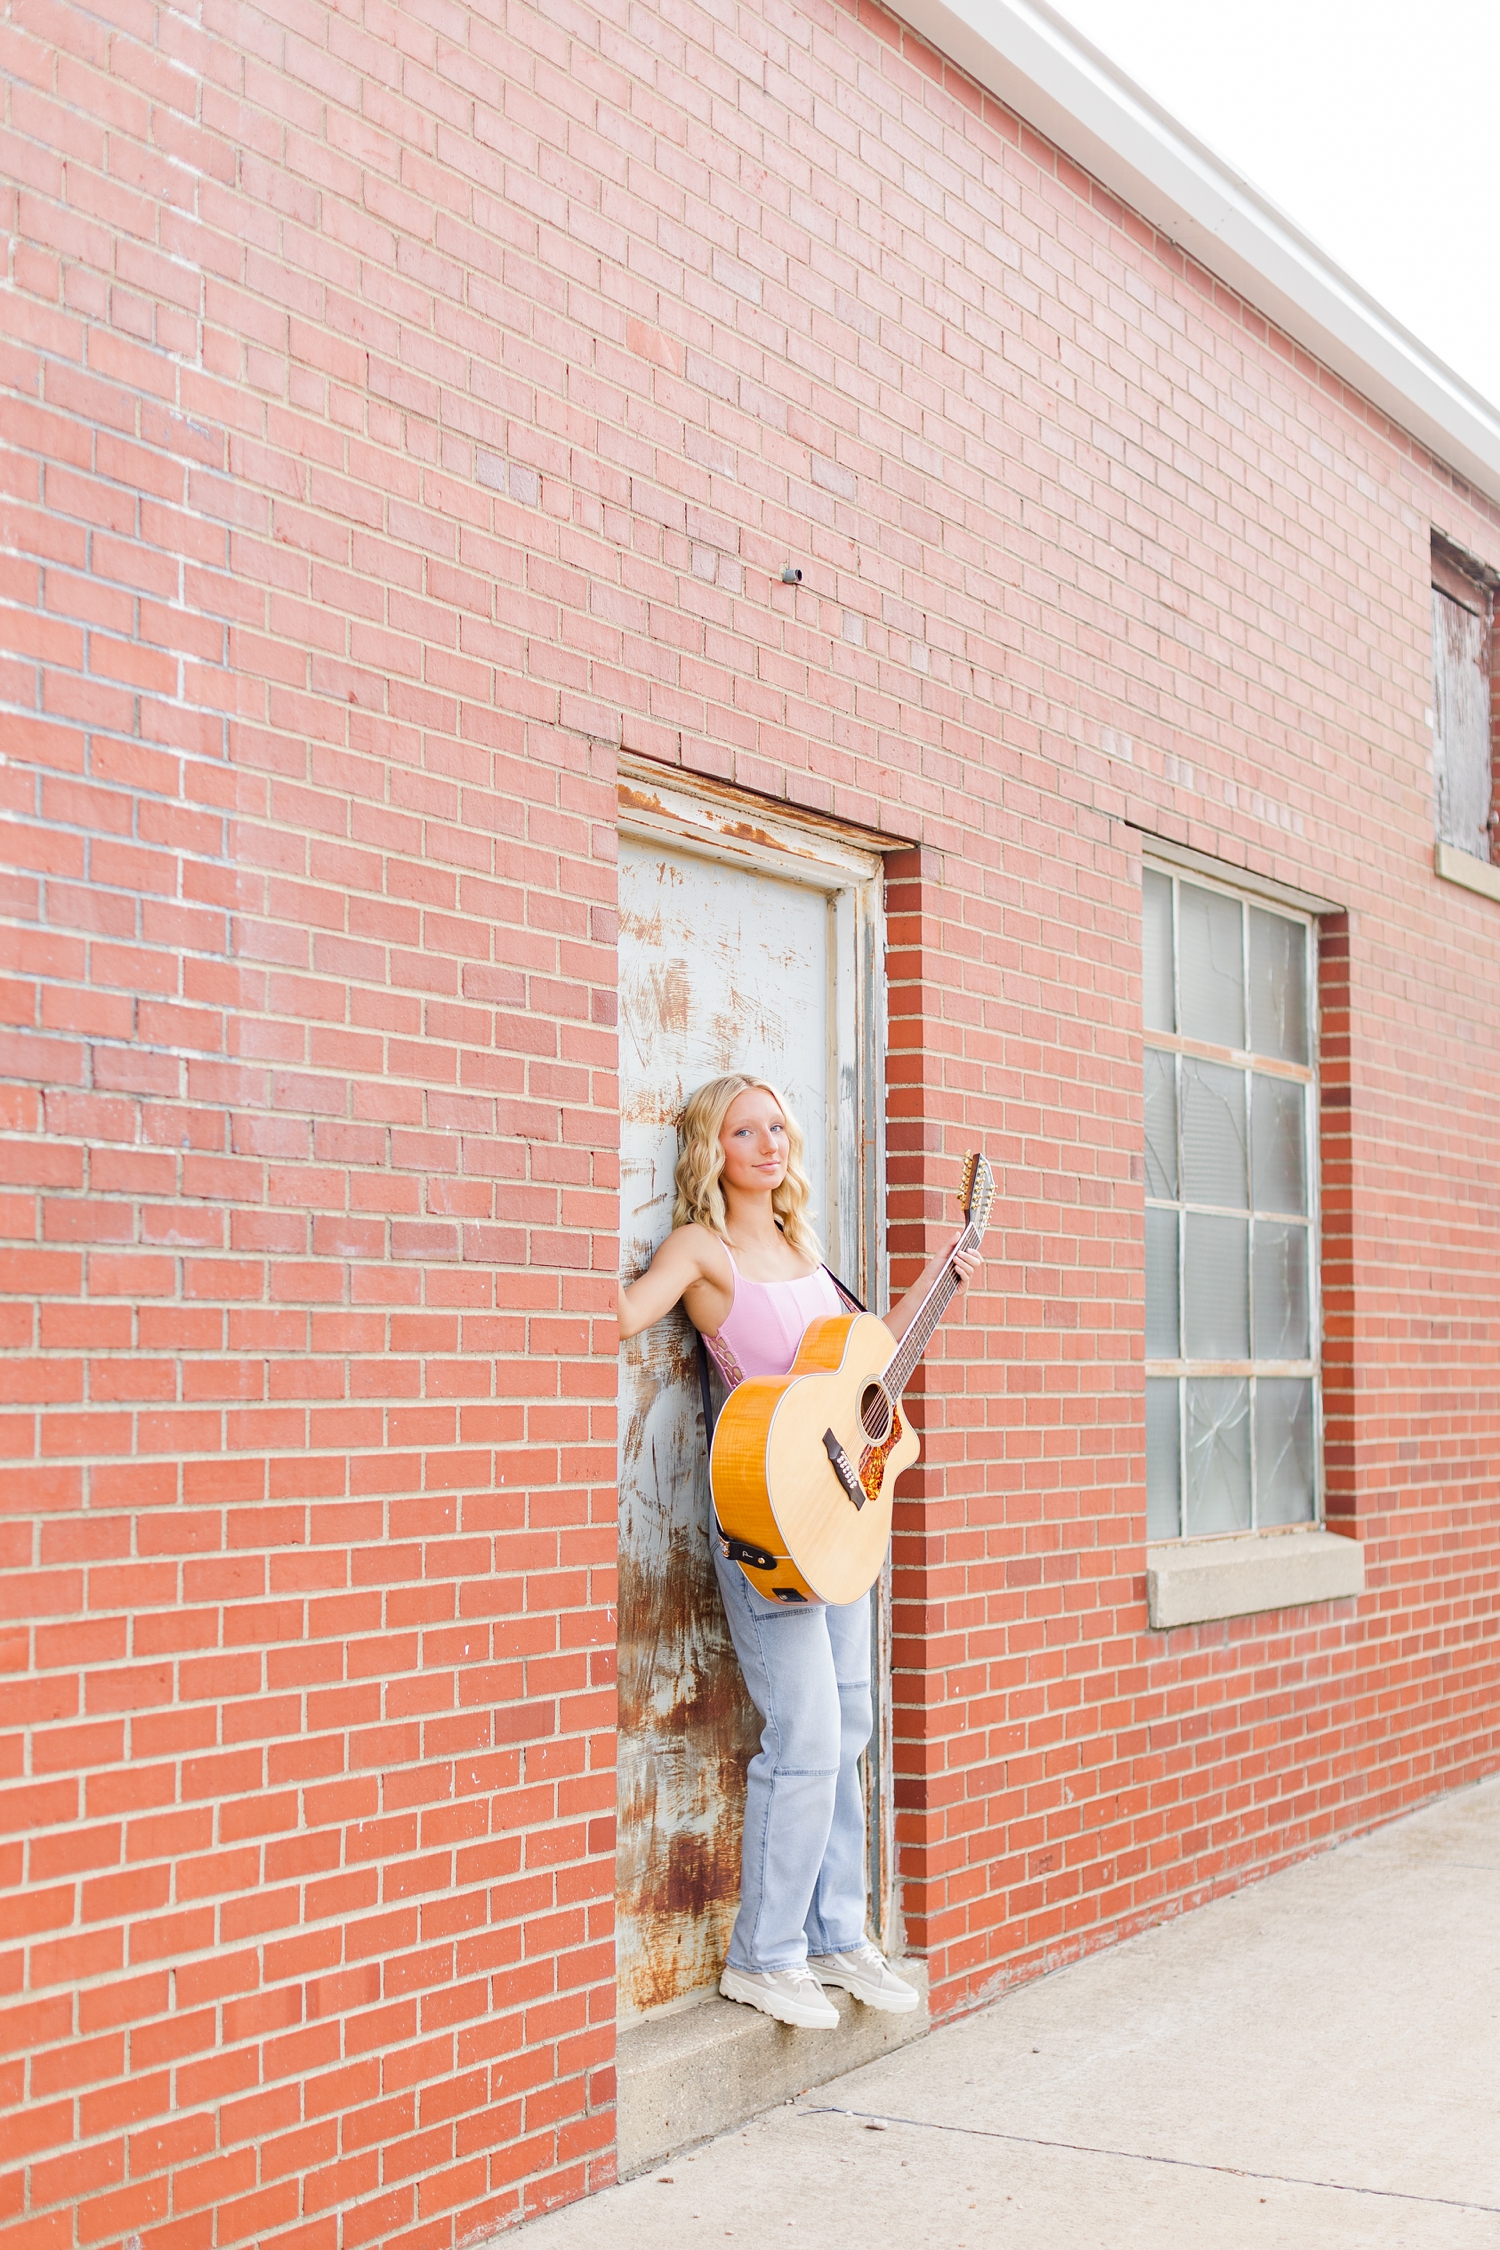 Avery stands in the doorway of an old brick warehouse holding her guitar in downtown Algona, IA | CB Studio